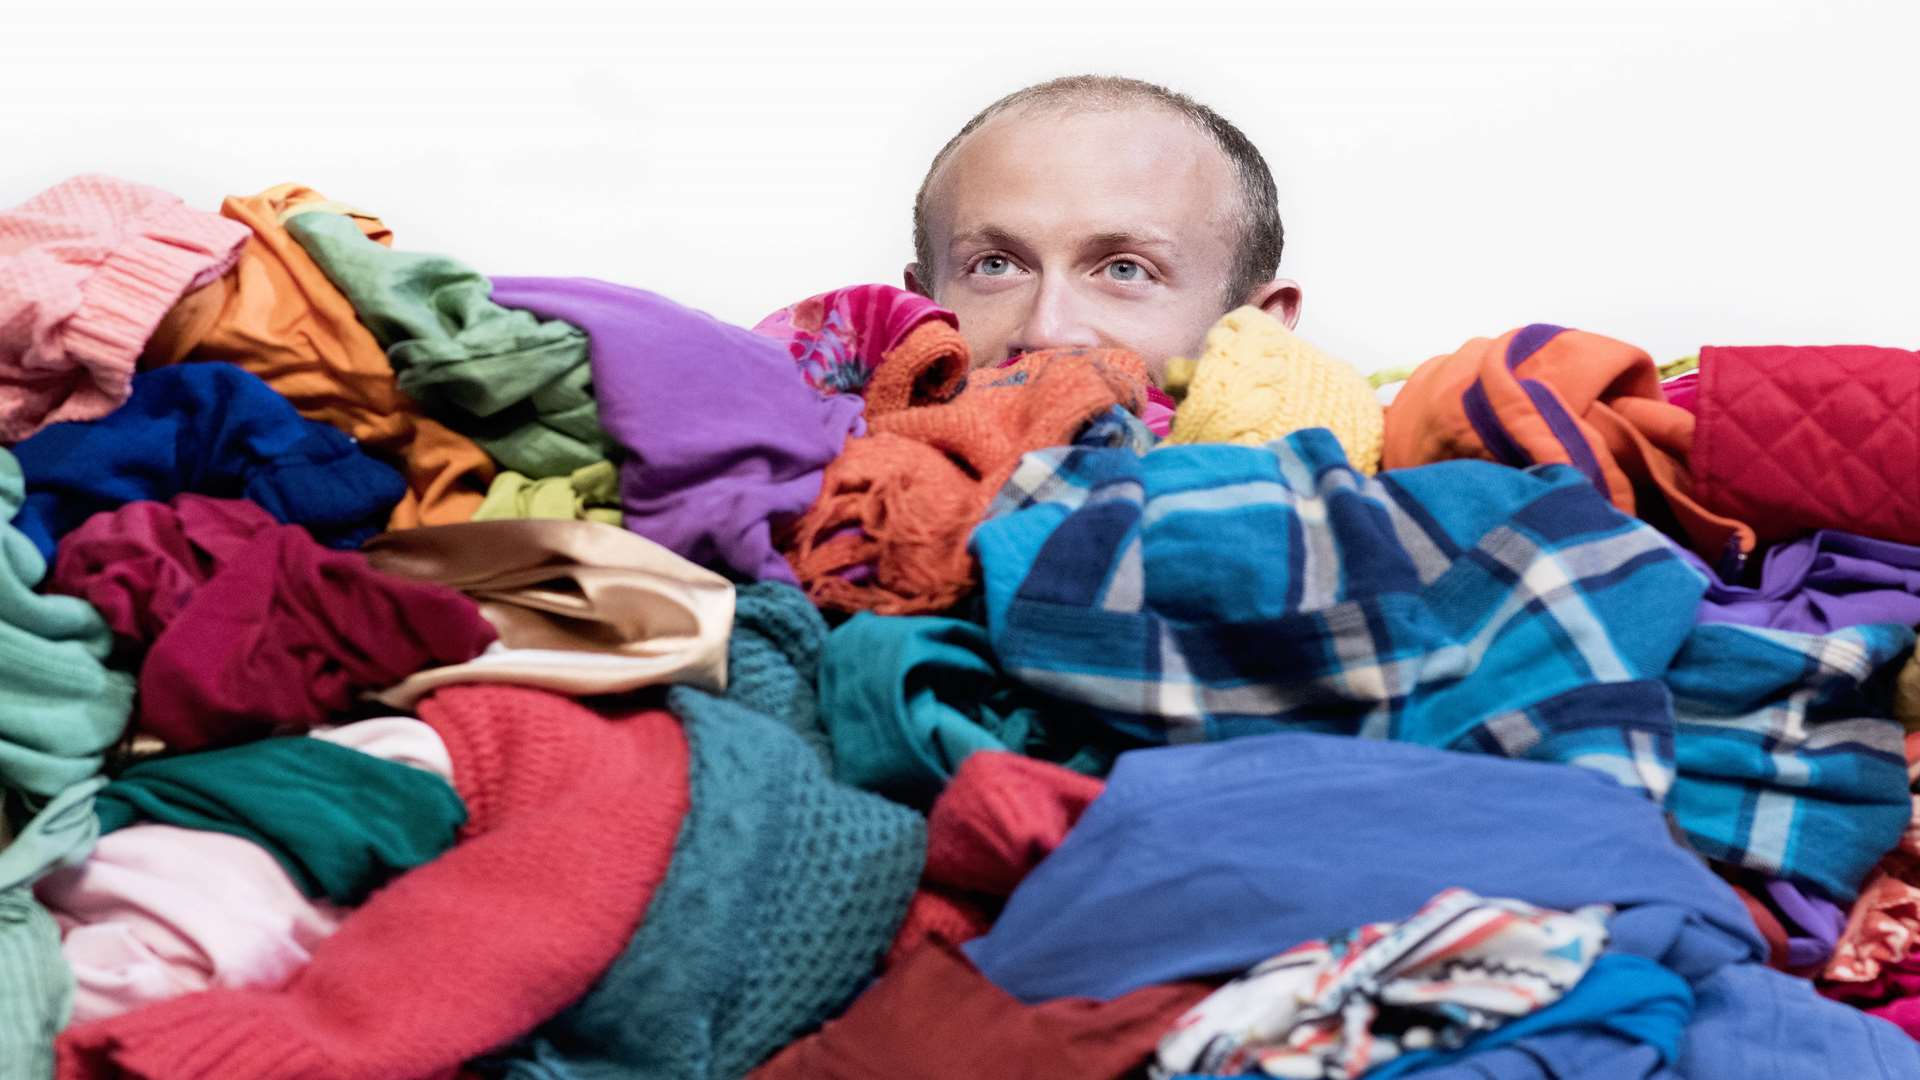 Getting Dressed is coming to the Gulbenkian at the University of Kent